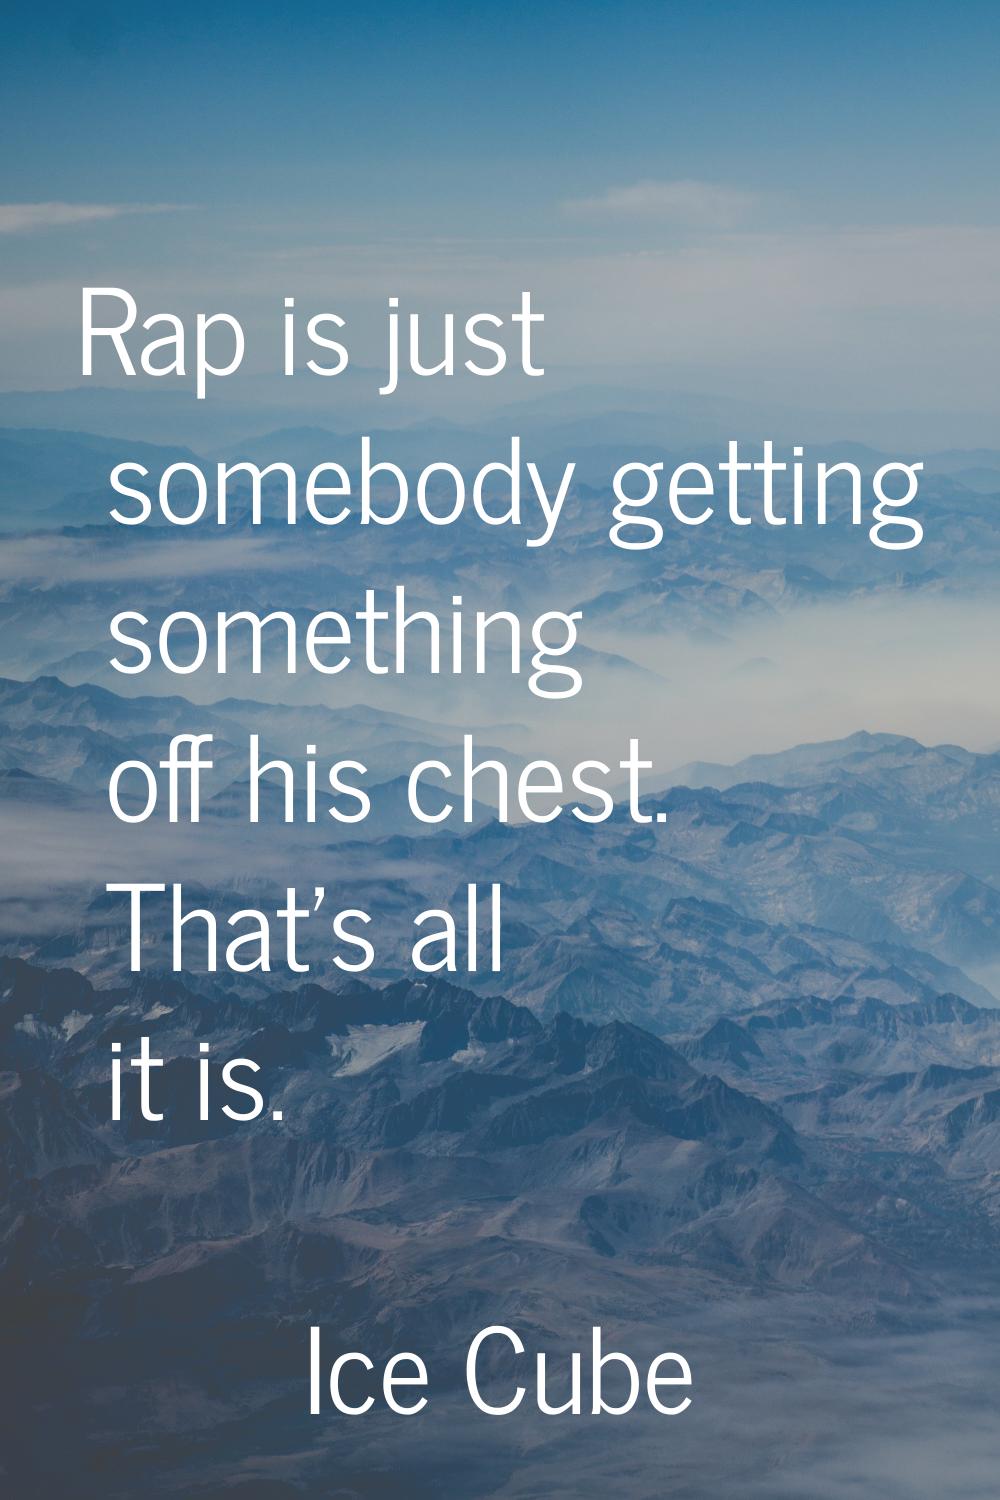 Rap is just somebody getting something off his chest. That's all it is.